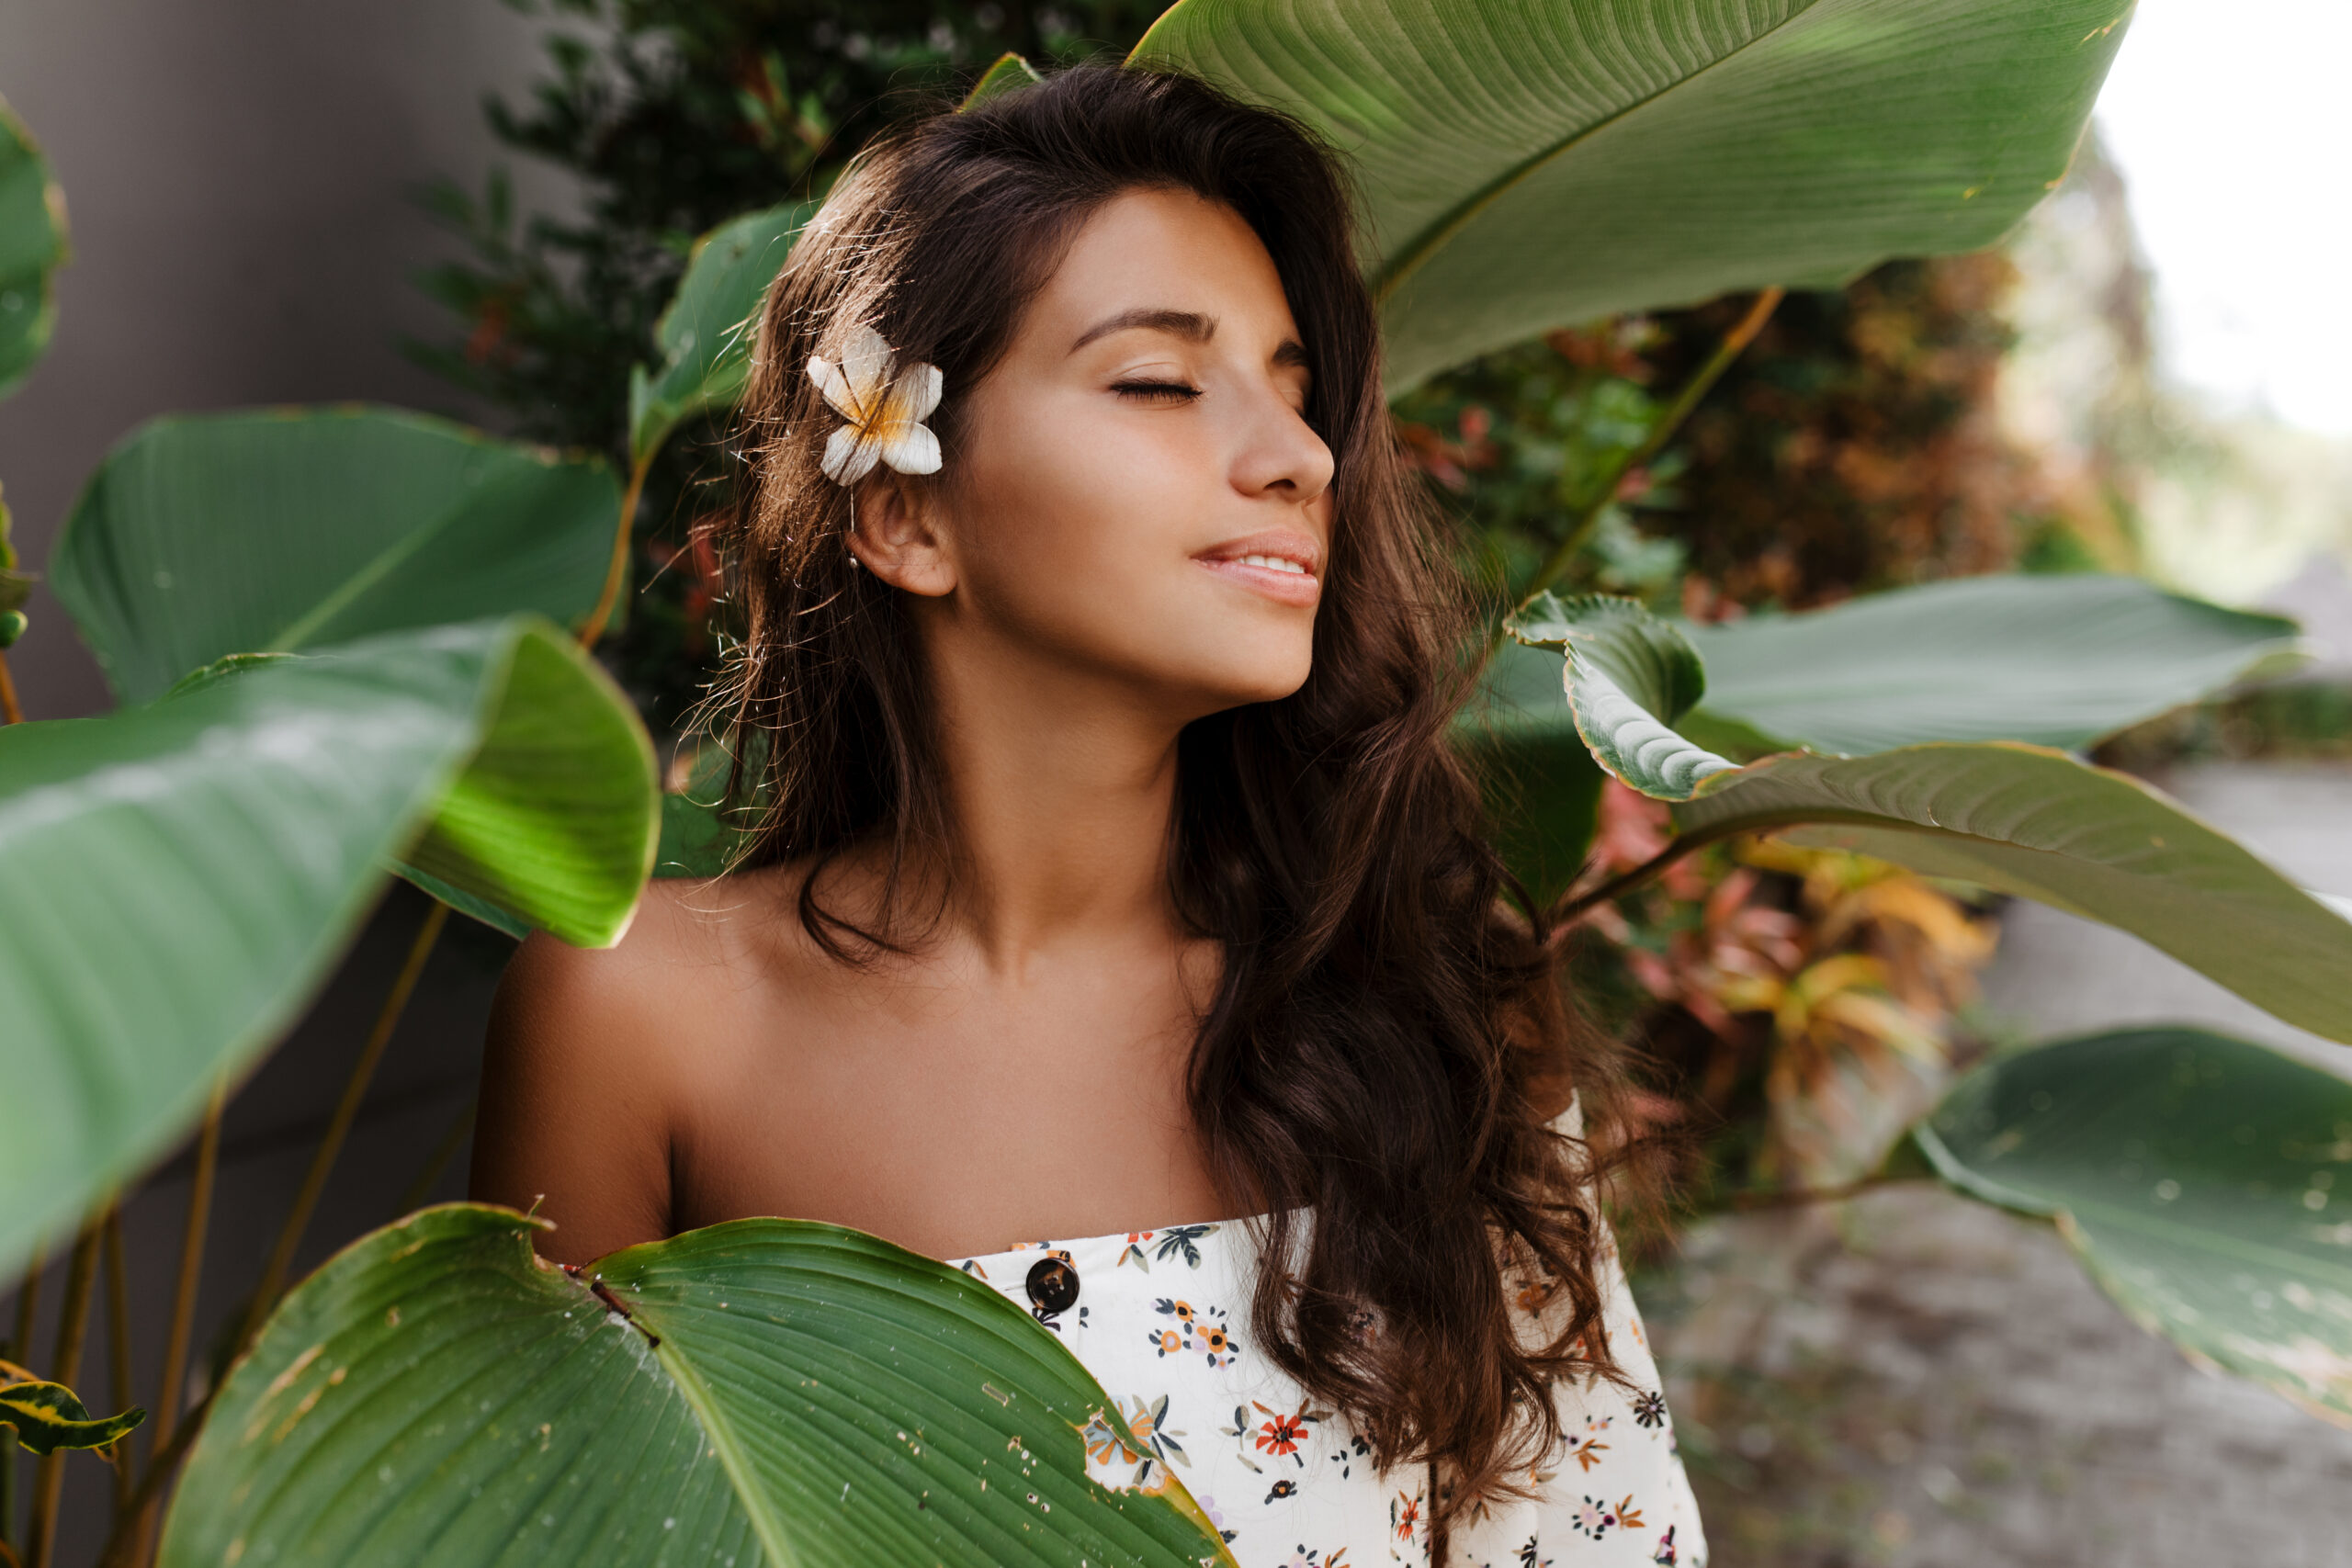 Close-up portrait of pacified woman with flower in dark wavy hair. Lady with slight smile and closed eyes posing against backdrop of tropical plant